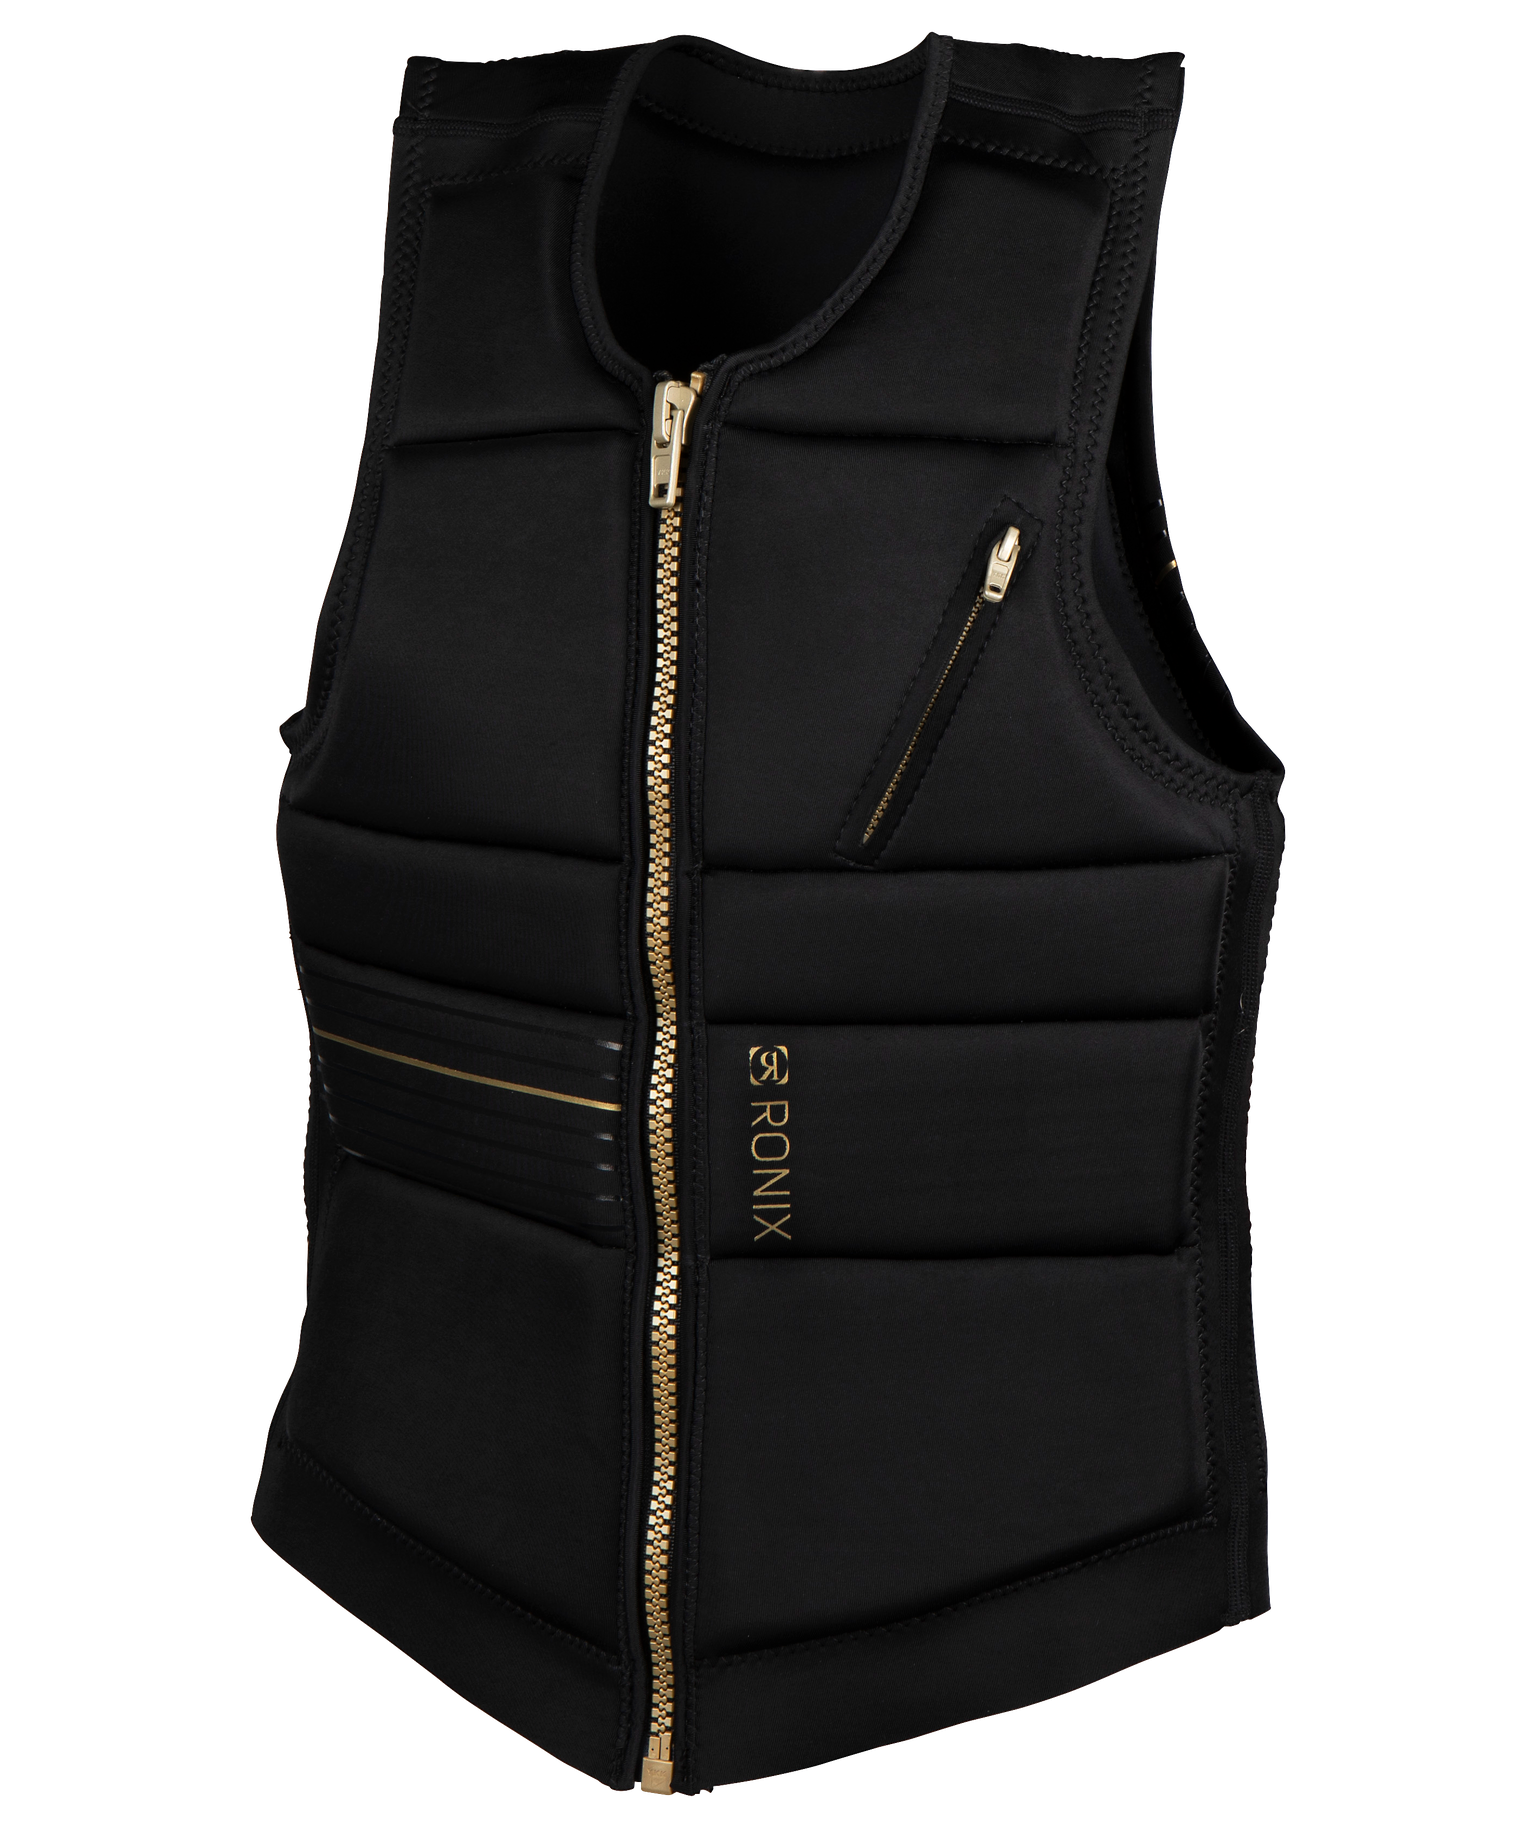 A Ronix 2024 Rise Women's CE Impact Vest with gold zippers, featuring a Manhattan Tailored Fit.